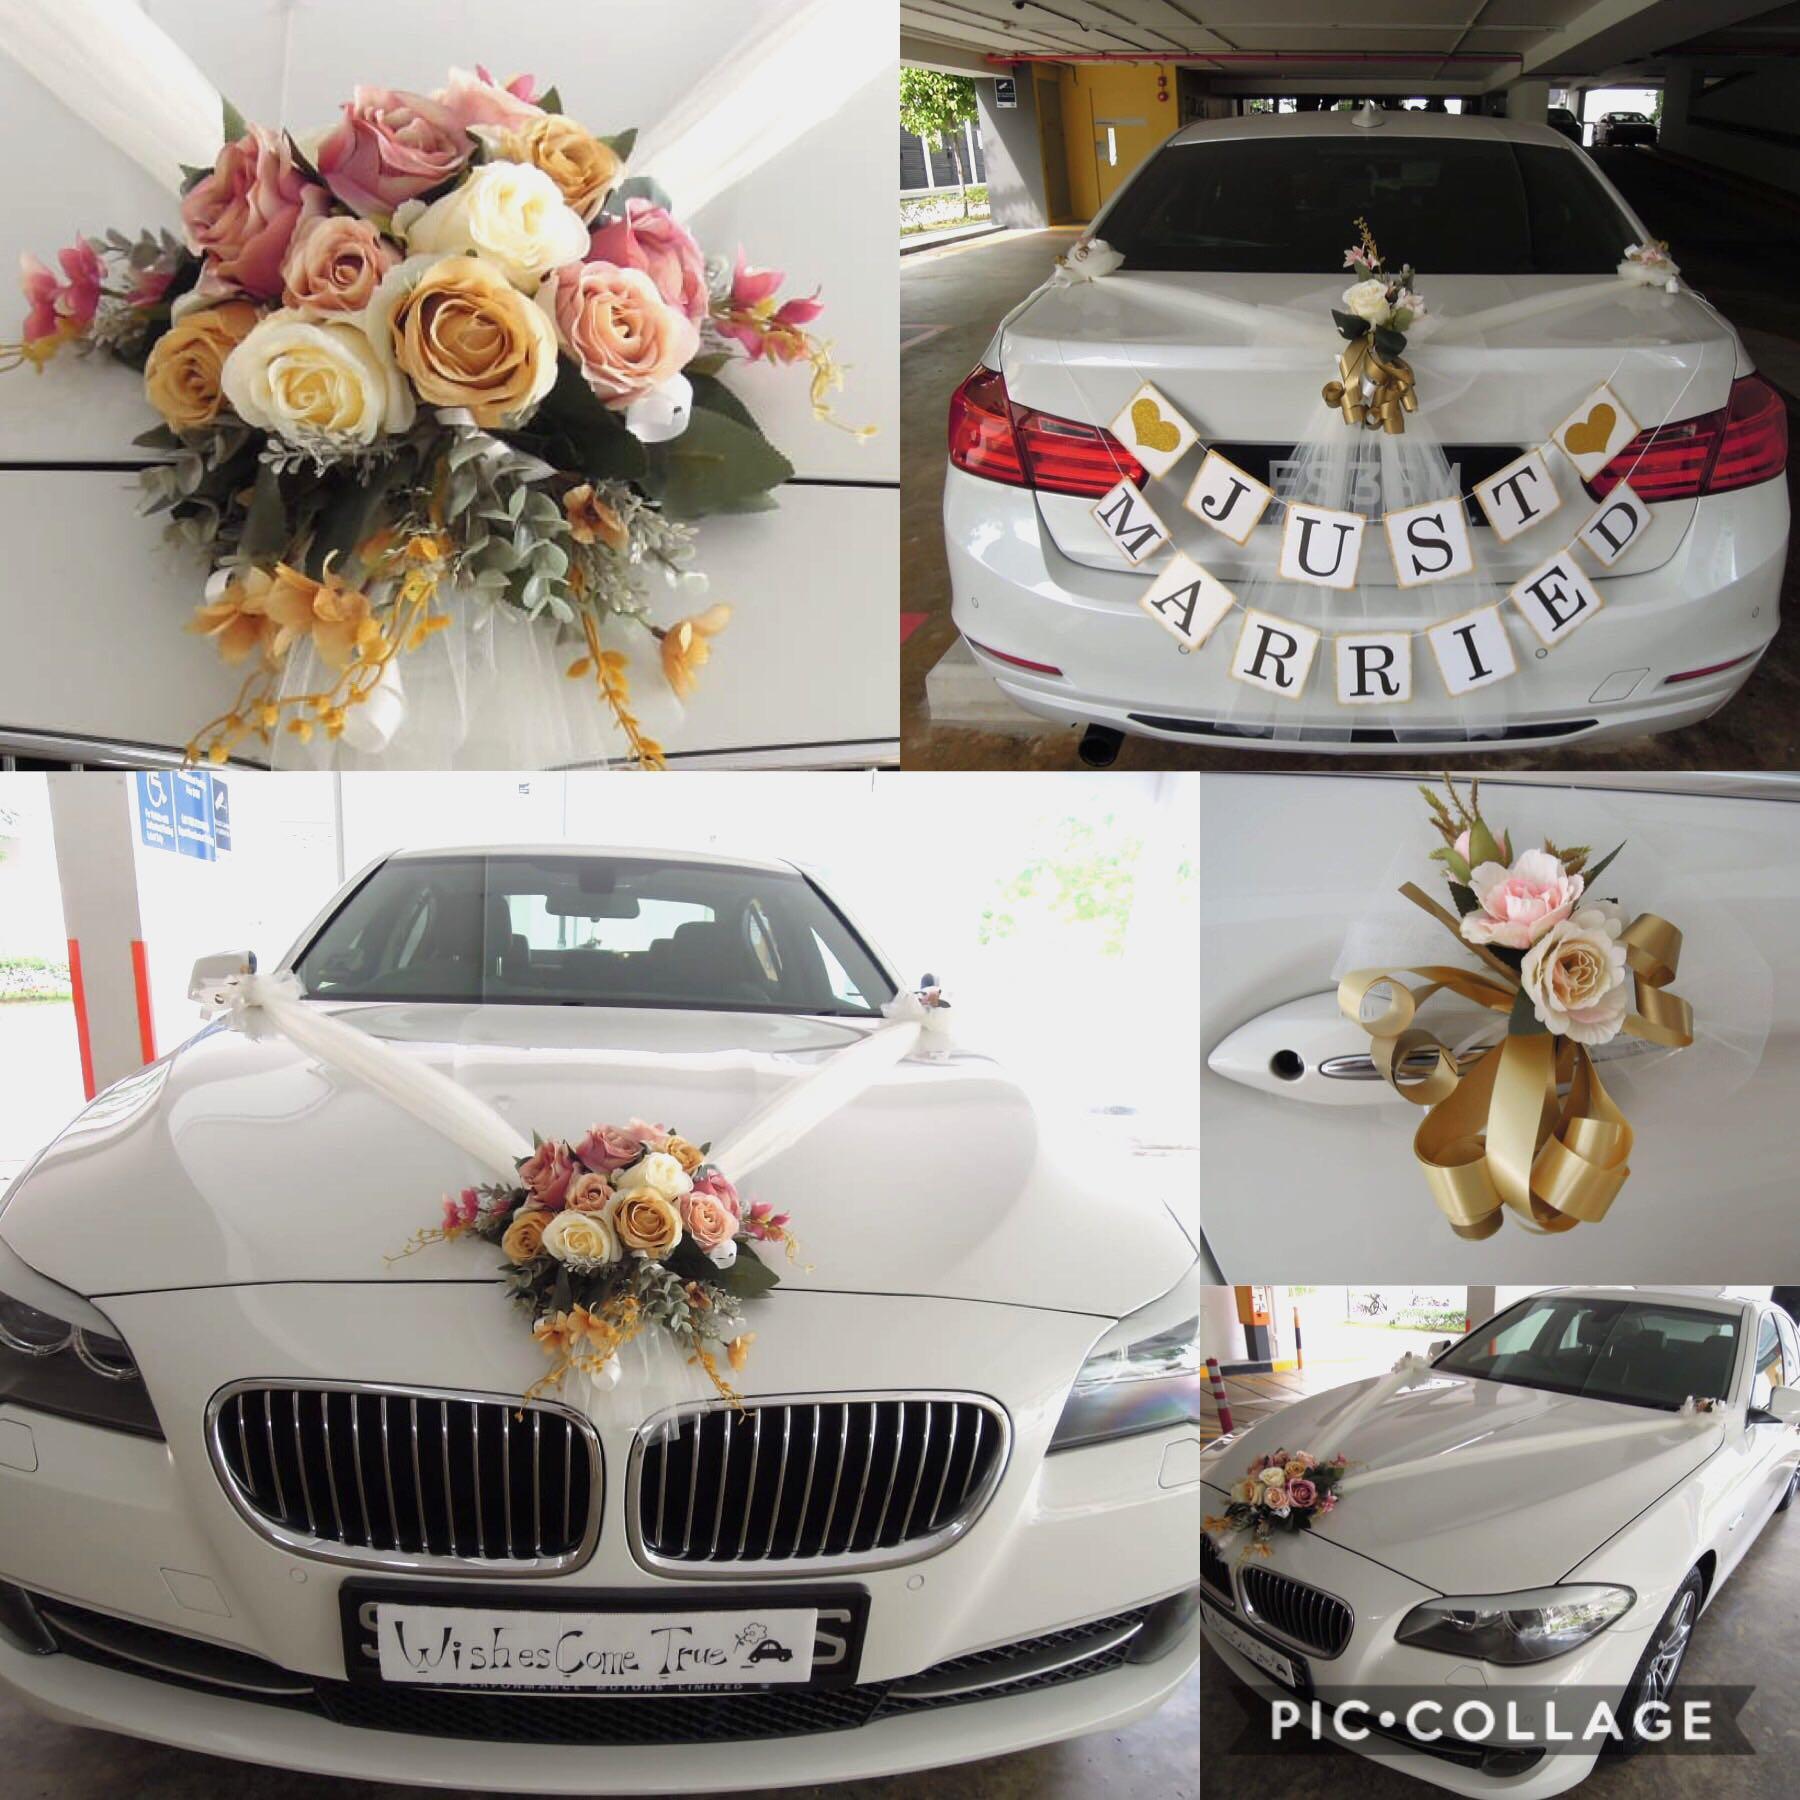 Wedding car decoration ideas that you can use for your marriage